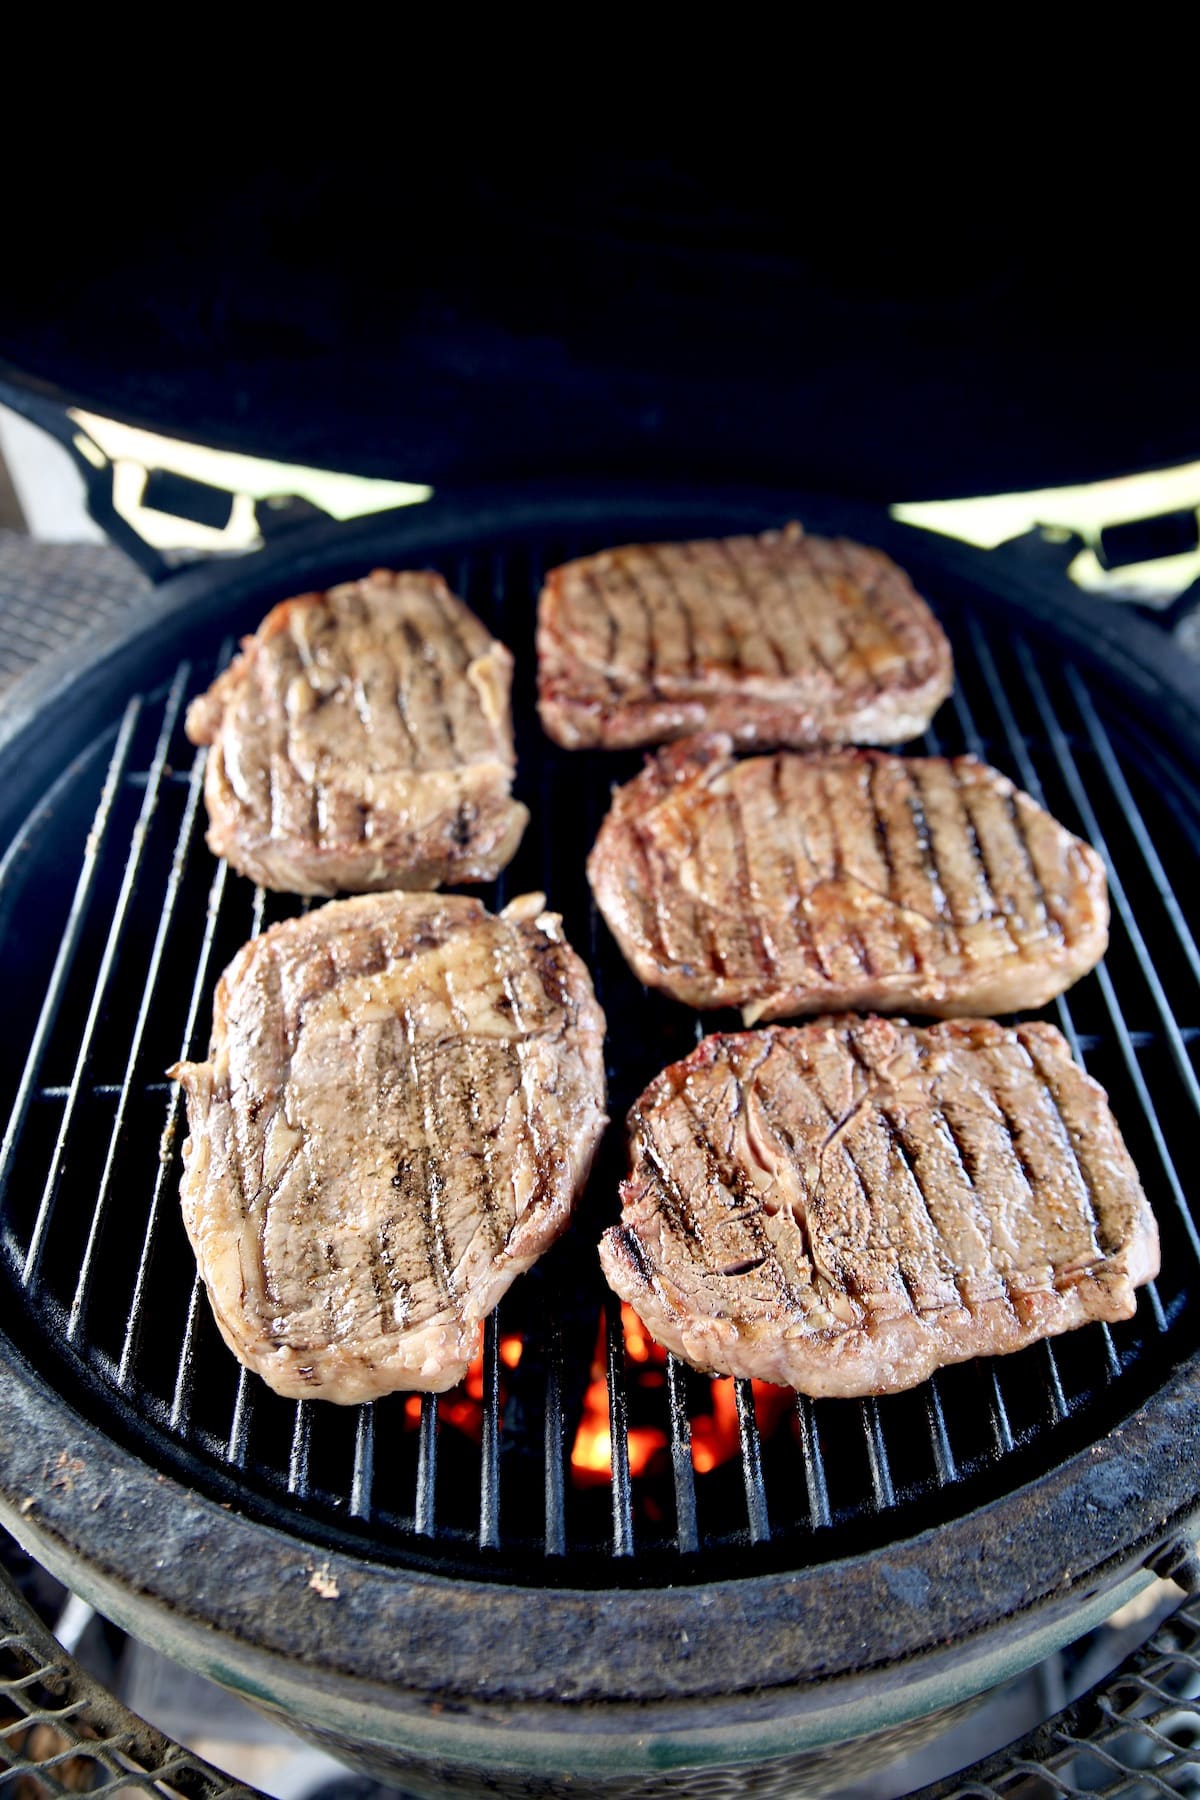 Grilling ribeye steaks on a ceramic grill.